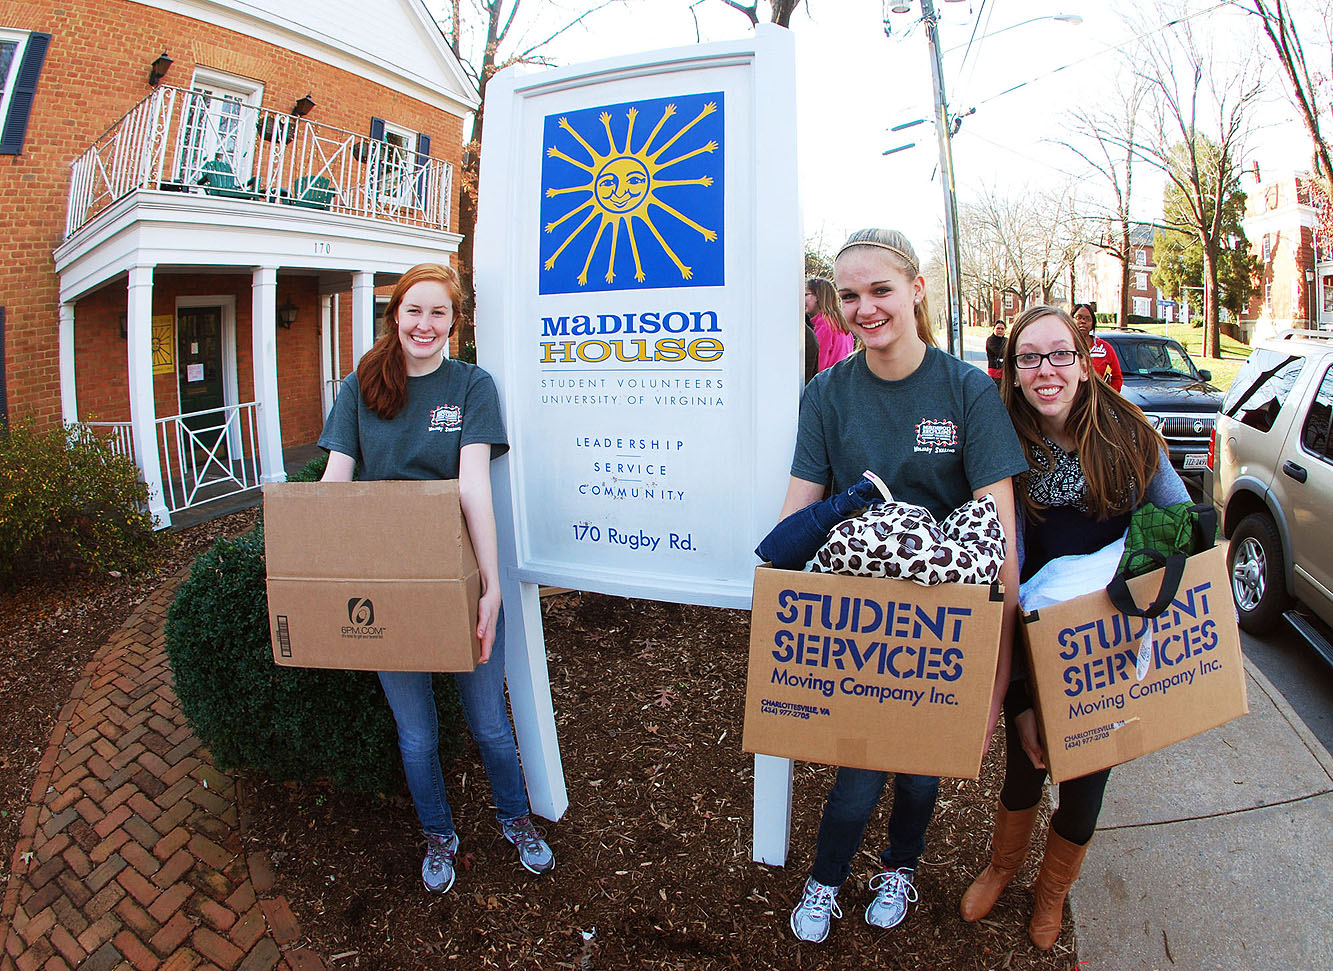 Student volunteers, from left, Ellen Schleckman, Stephanie Bolton and Jennifer Breeze carry boxes full of donations into Madison House